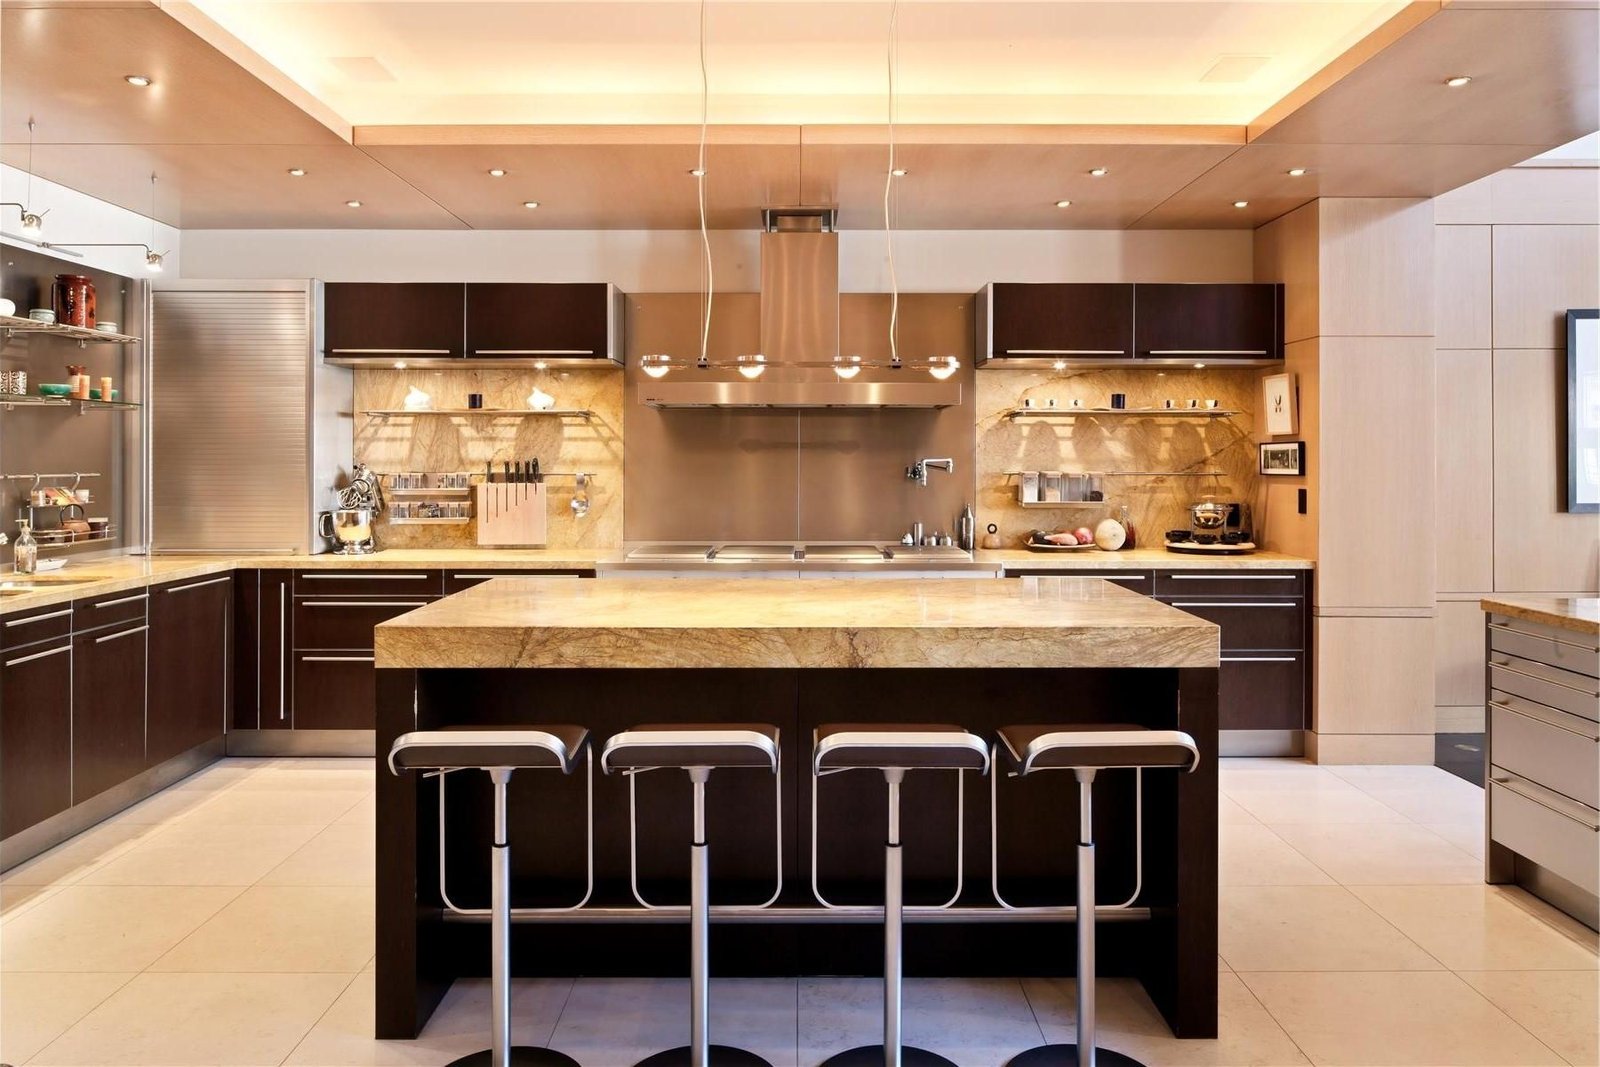 Top Questions to Ask Before Hiring Kitchen Installers